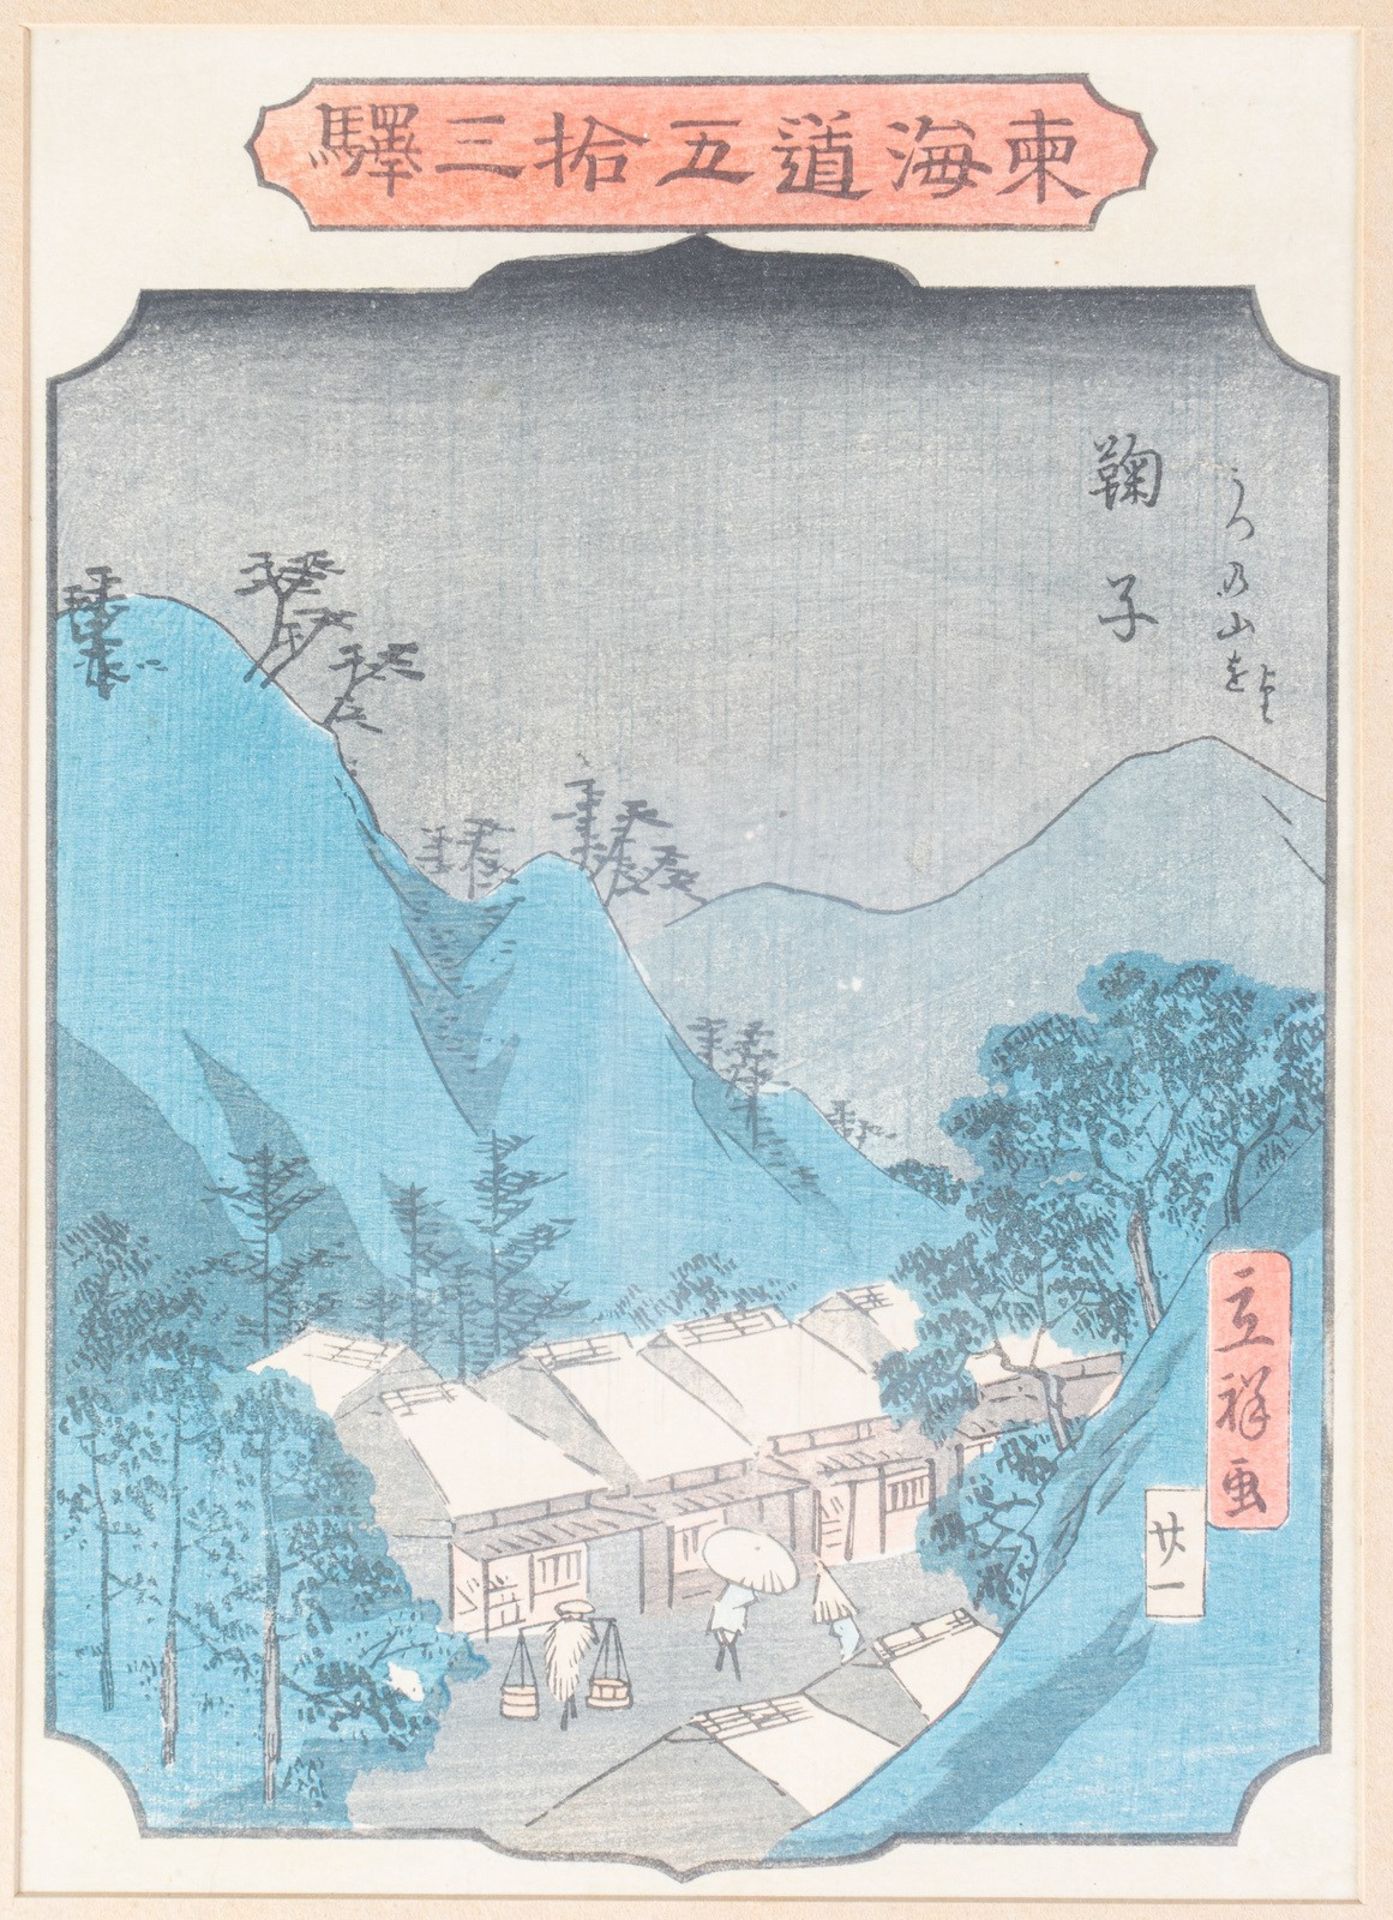 Utagawa Hiroshige II Utagawa Hiroshige II (1826-1869) signed with his nickname RisshoThree Ukyio-e p - Image 3 of 6